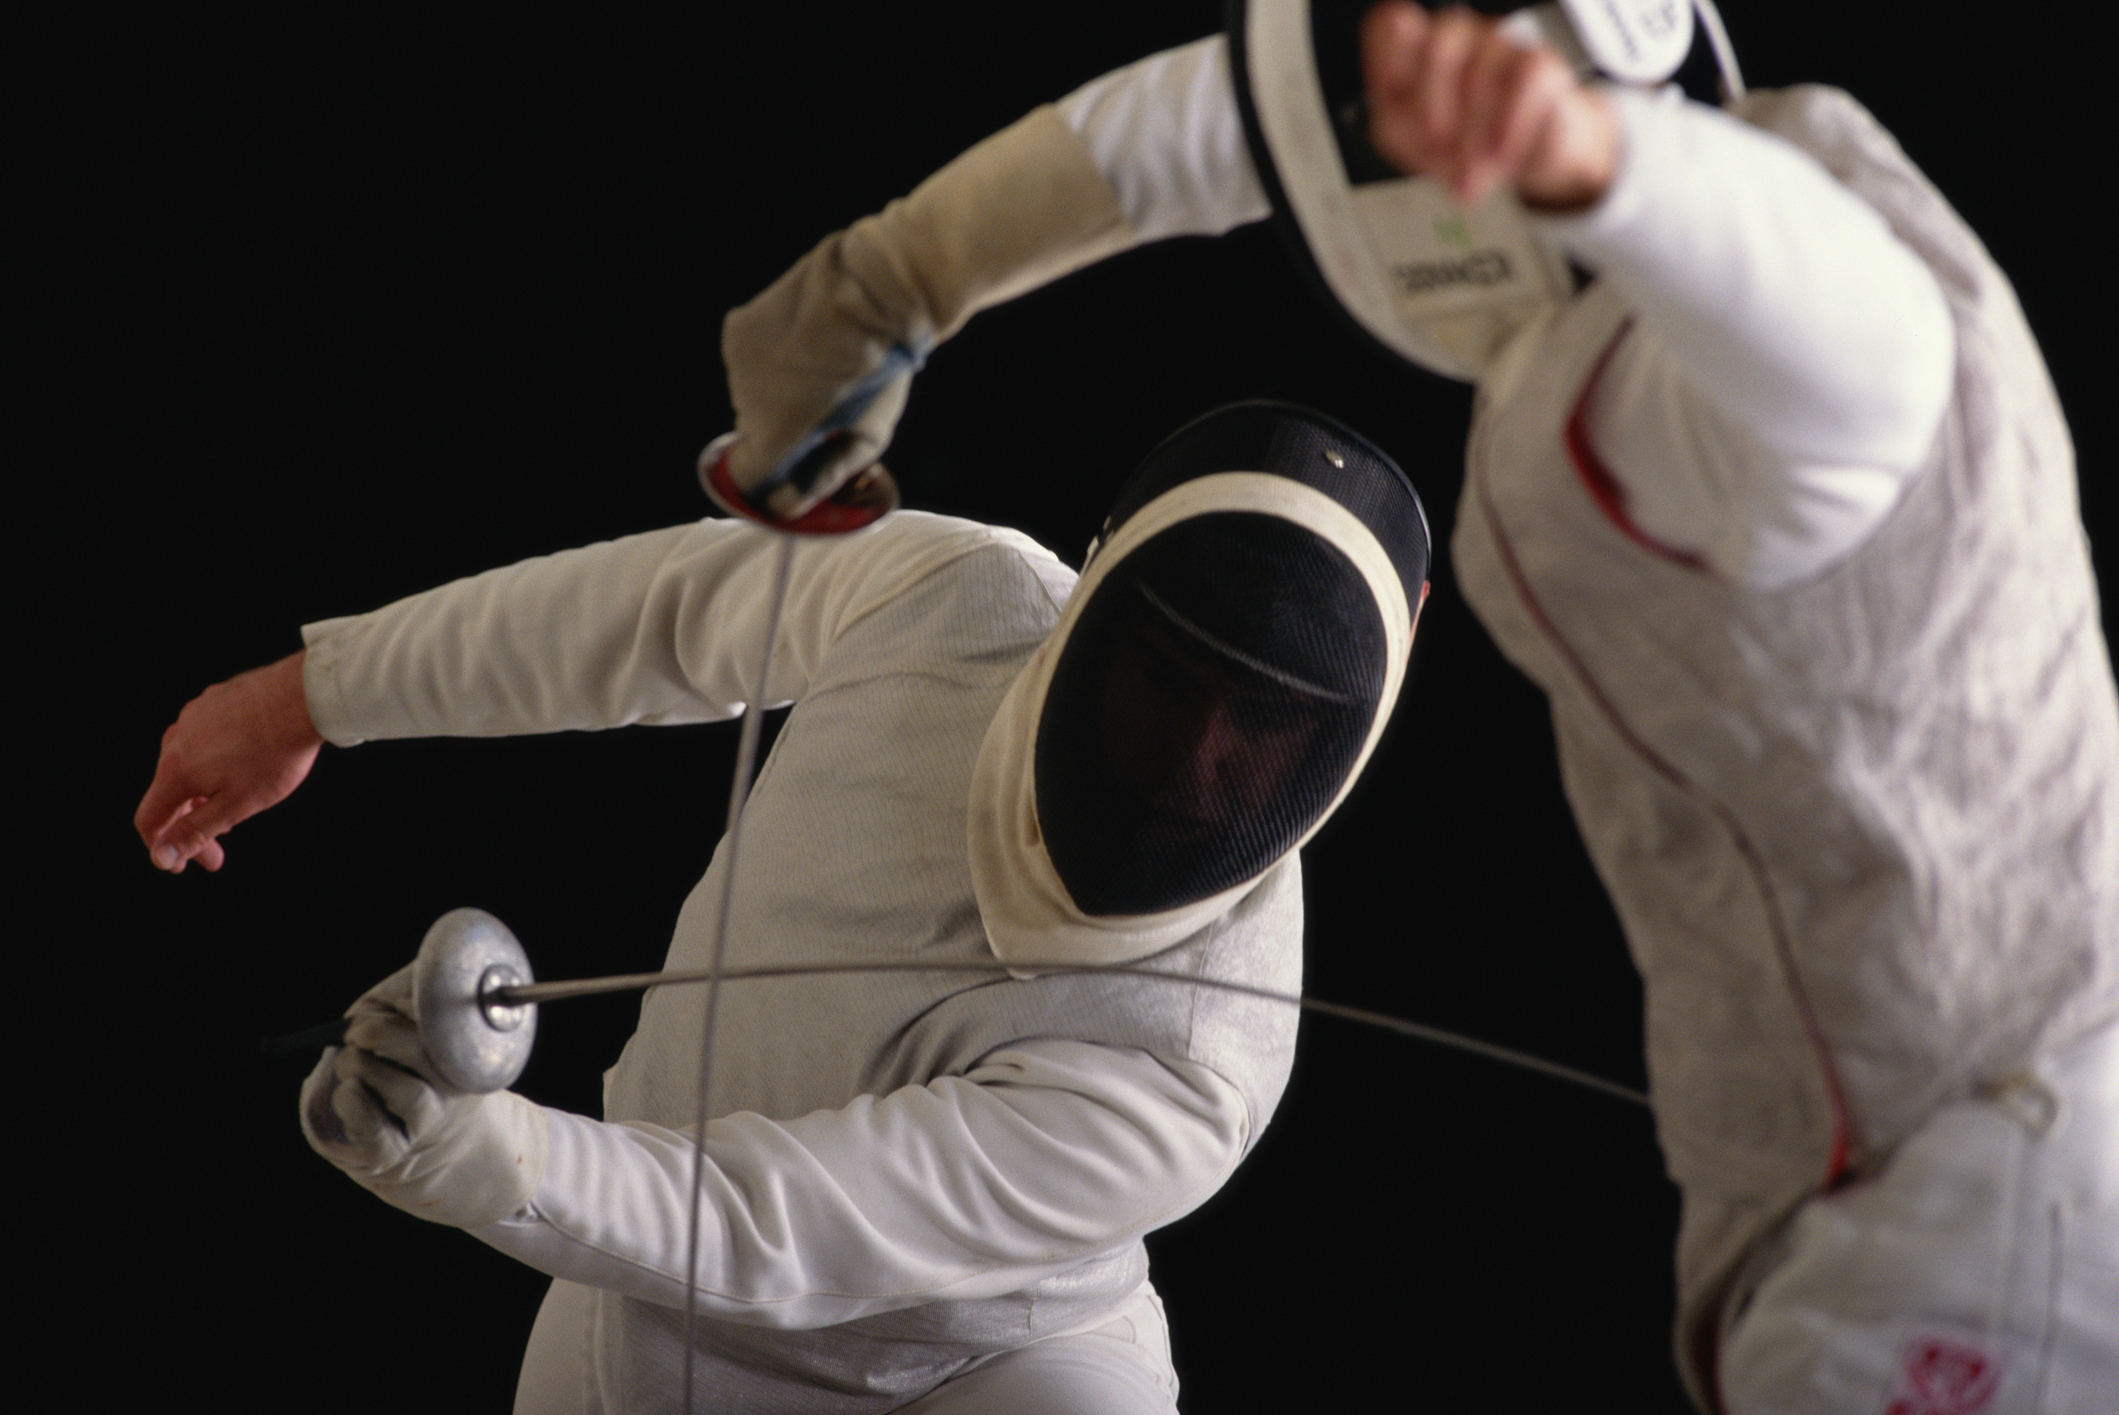 Two fencers in protective gear engaged in a match